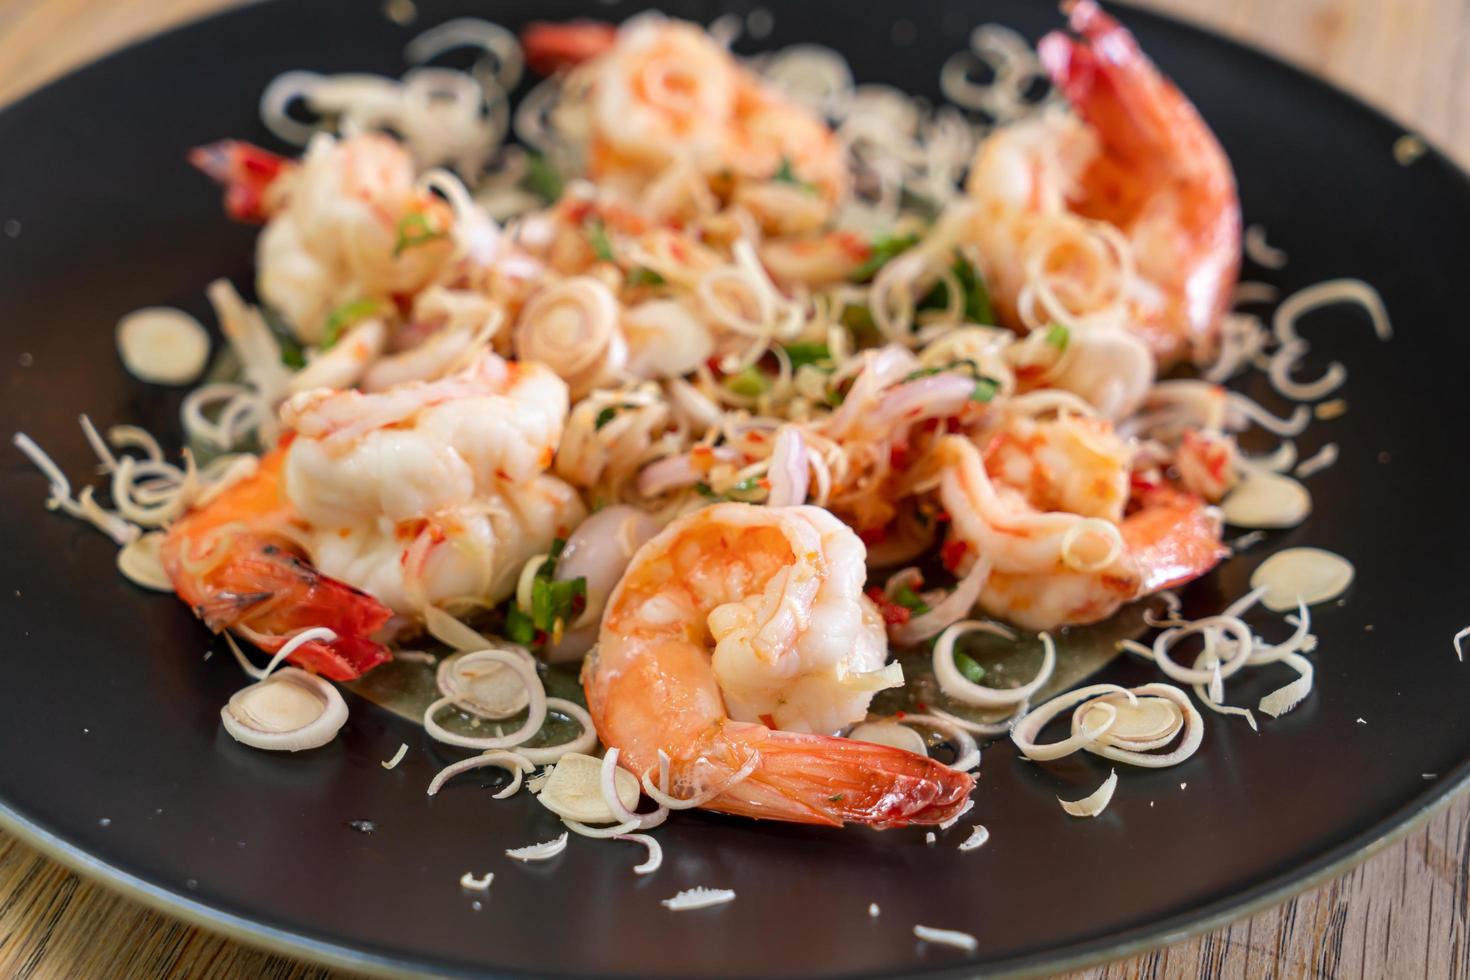 Spicy shrimp salad with herb on plate photo